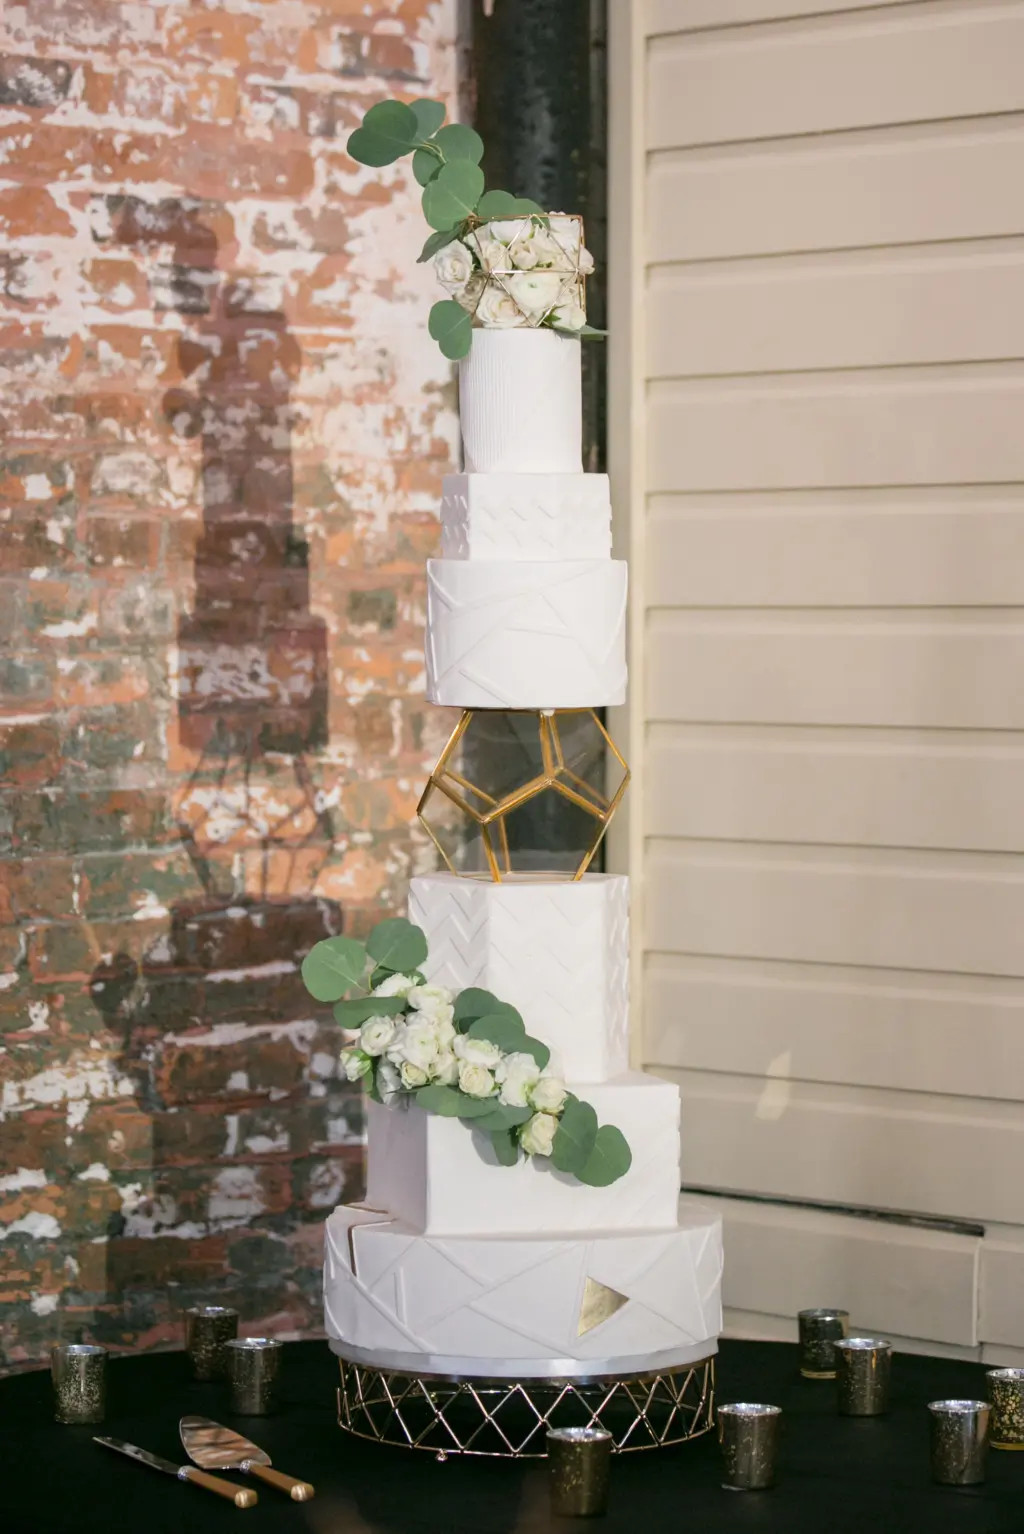 White Six-tiered Geometric Wedding Cake with White Rose Accents | Tampa Bay Bakery The Artistic Whisk